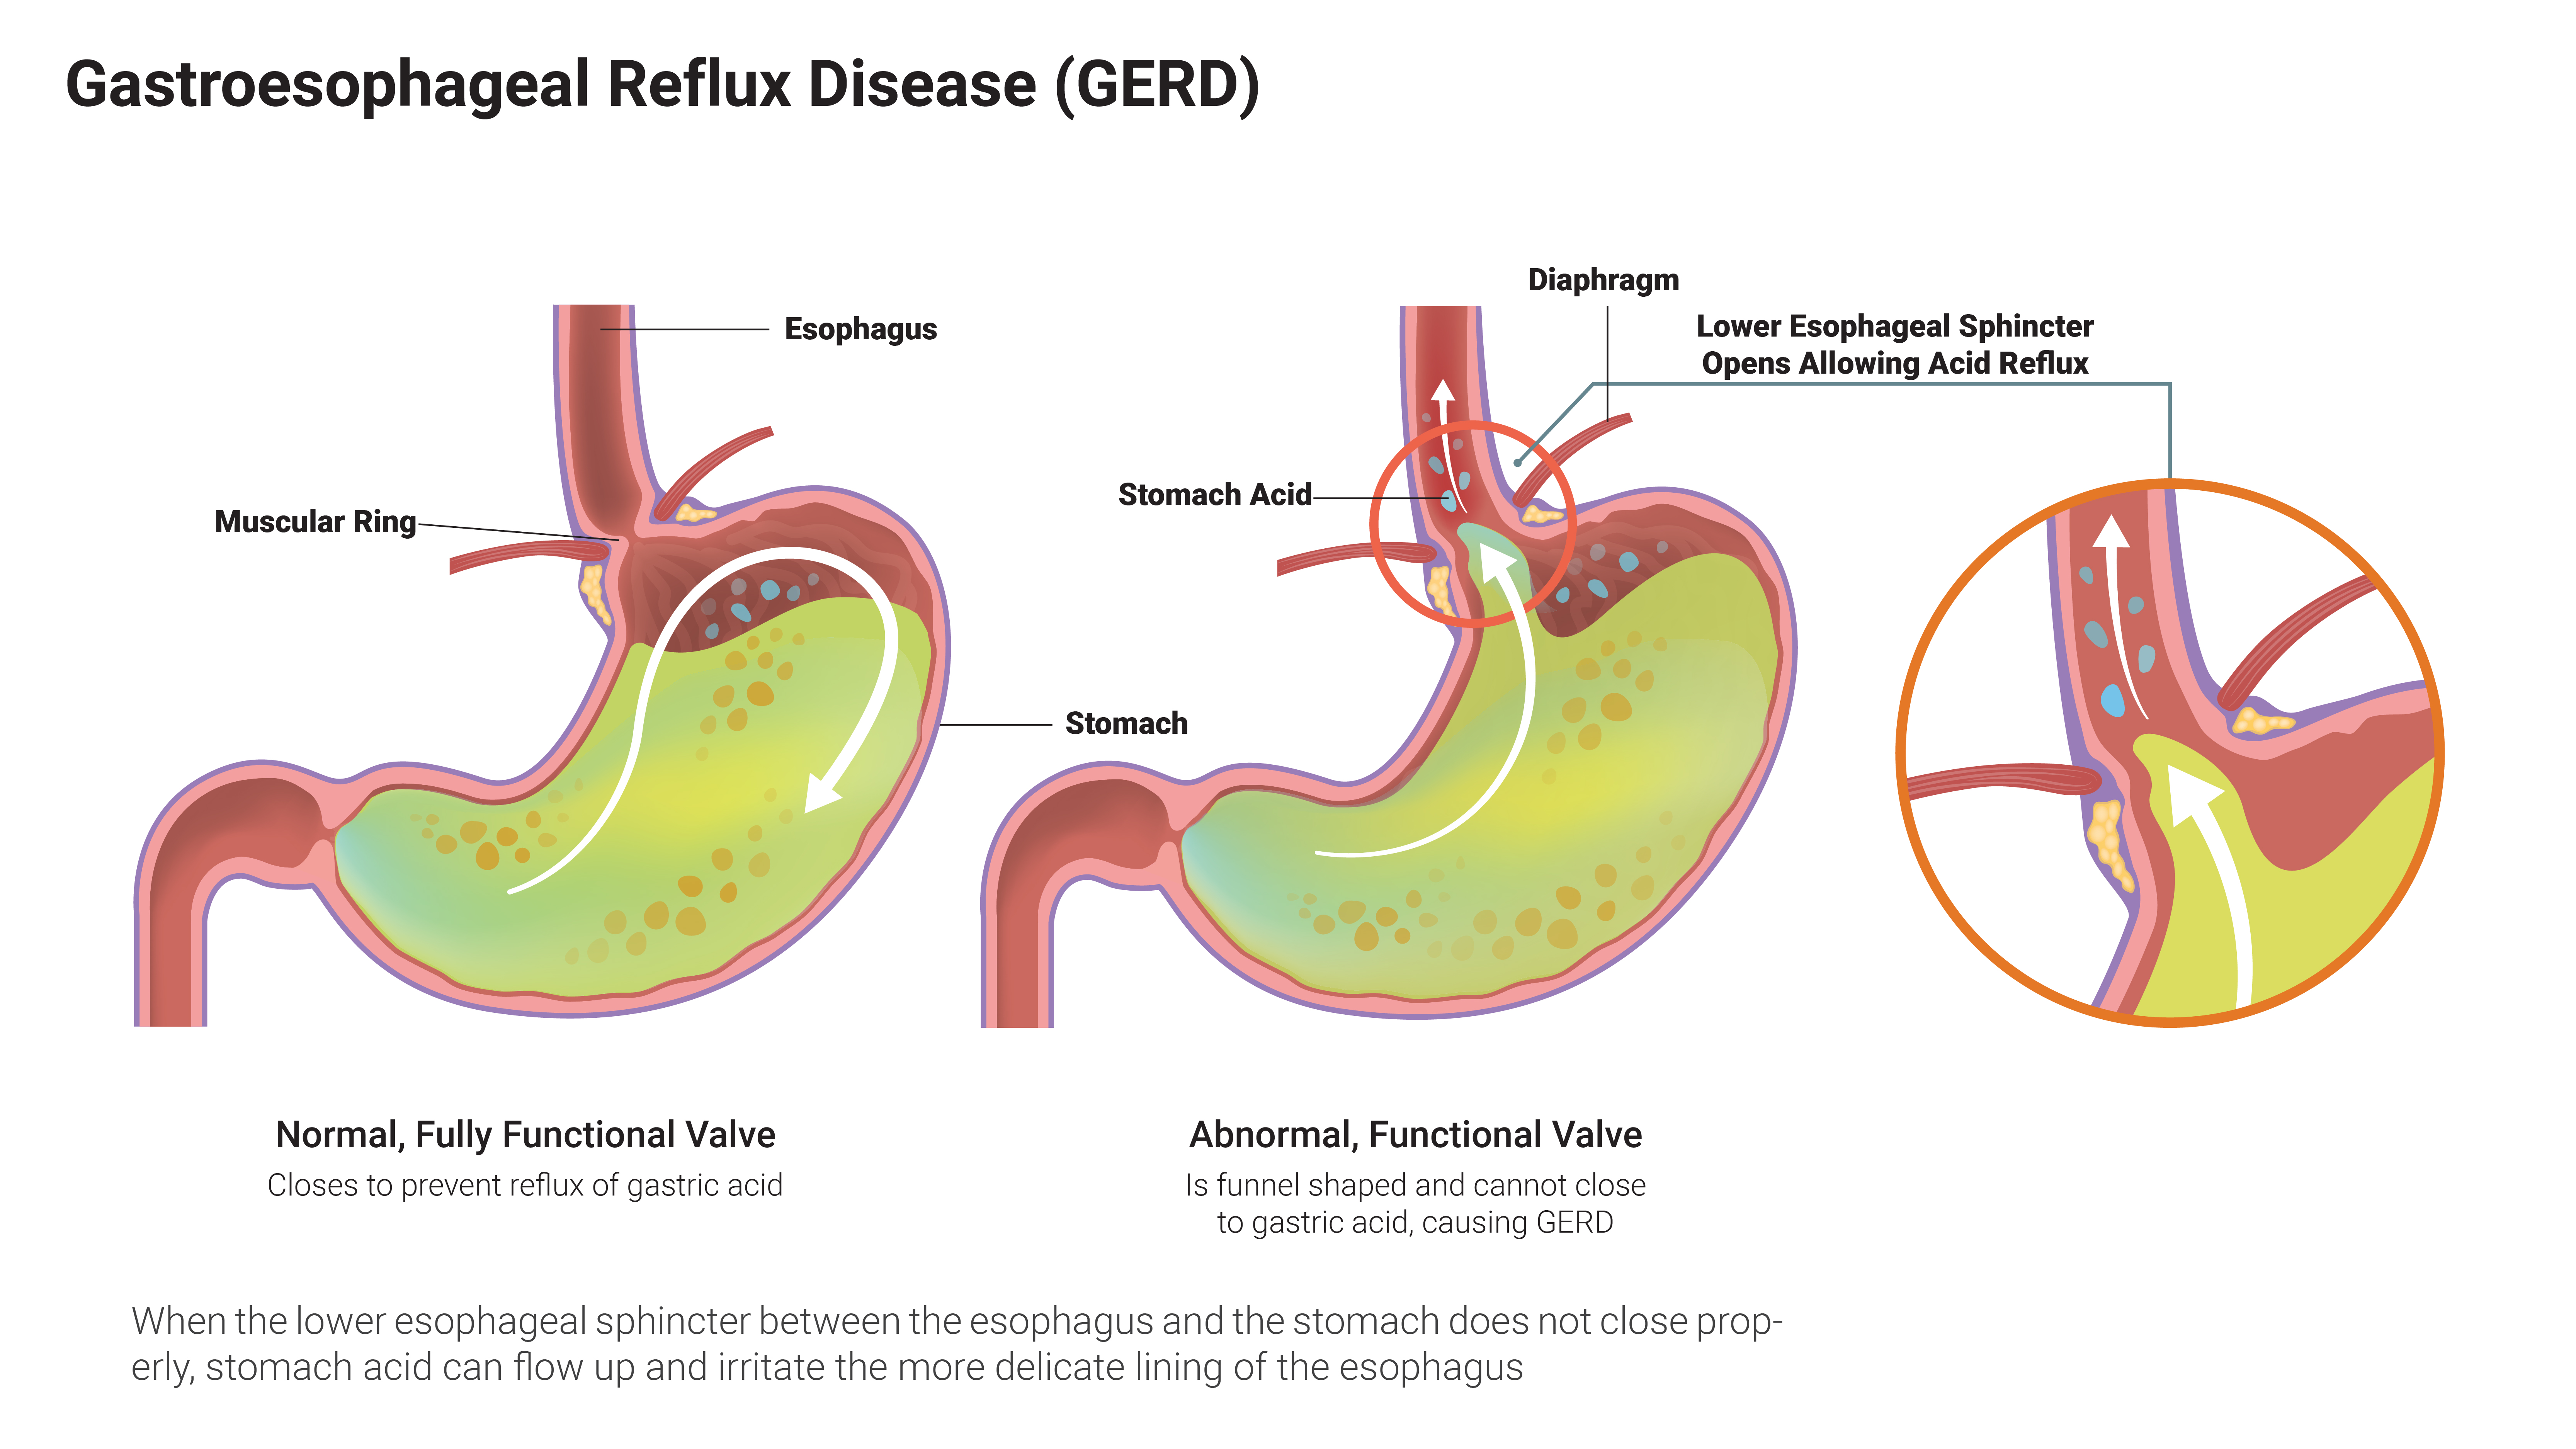 Acid Reflux: The Causes and Treatments | The Surgical Clinic in TN